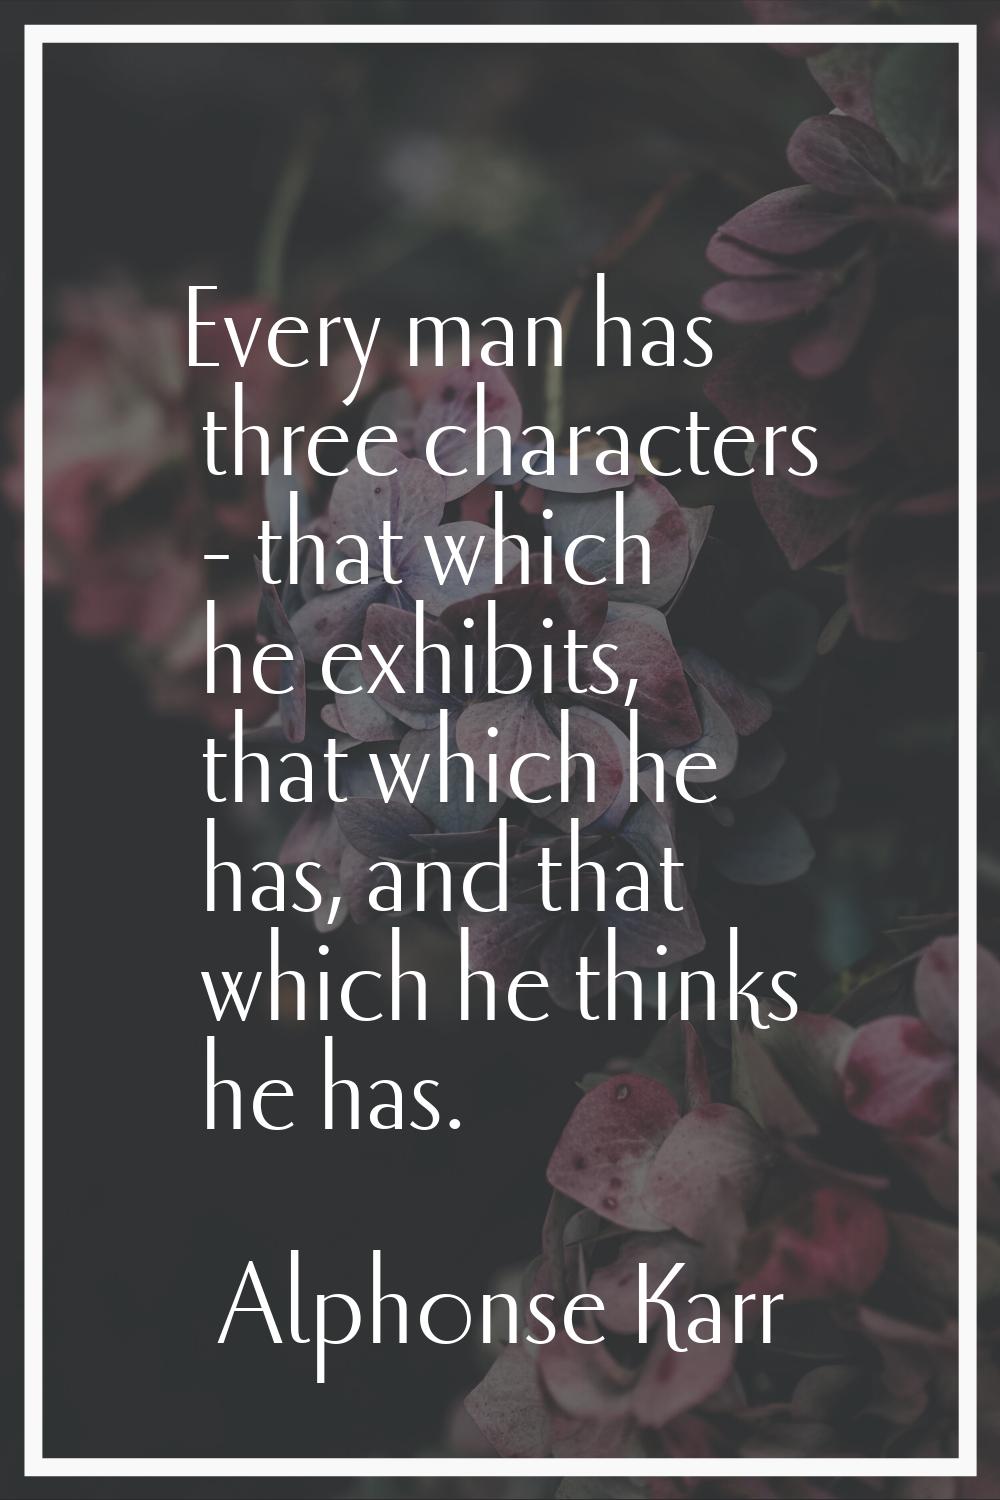 Every man has three characters - that which he exhibits, that which he has, and that which he think